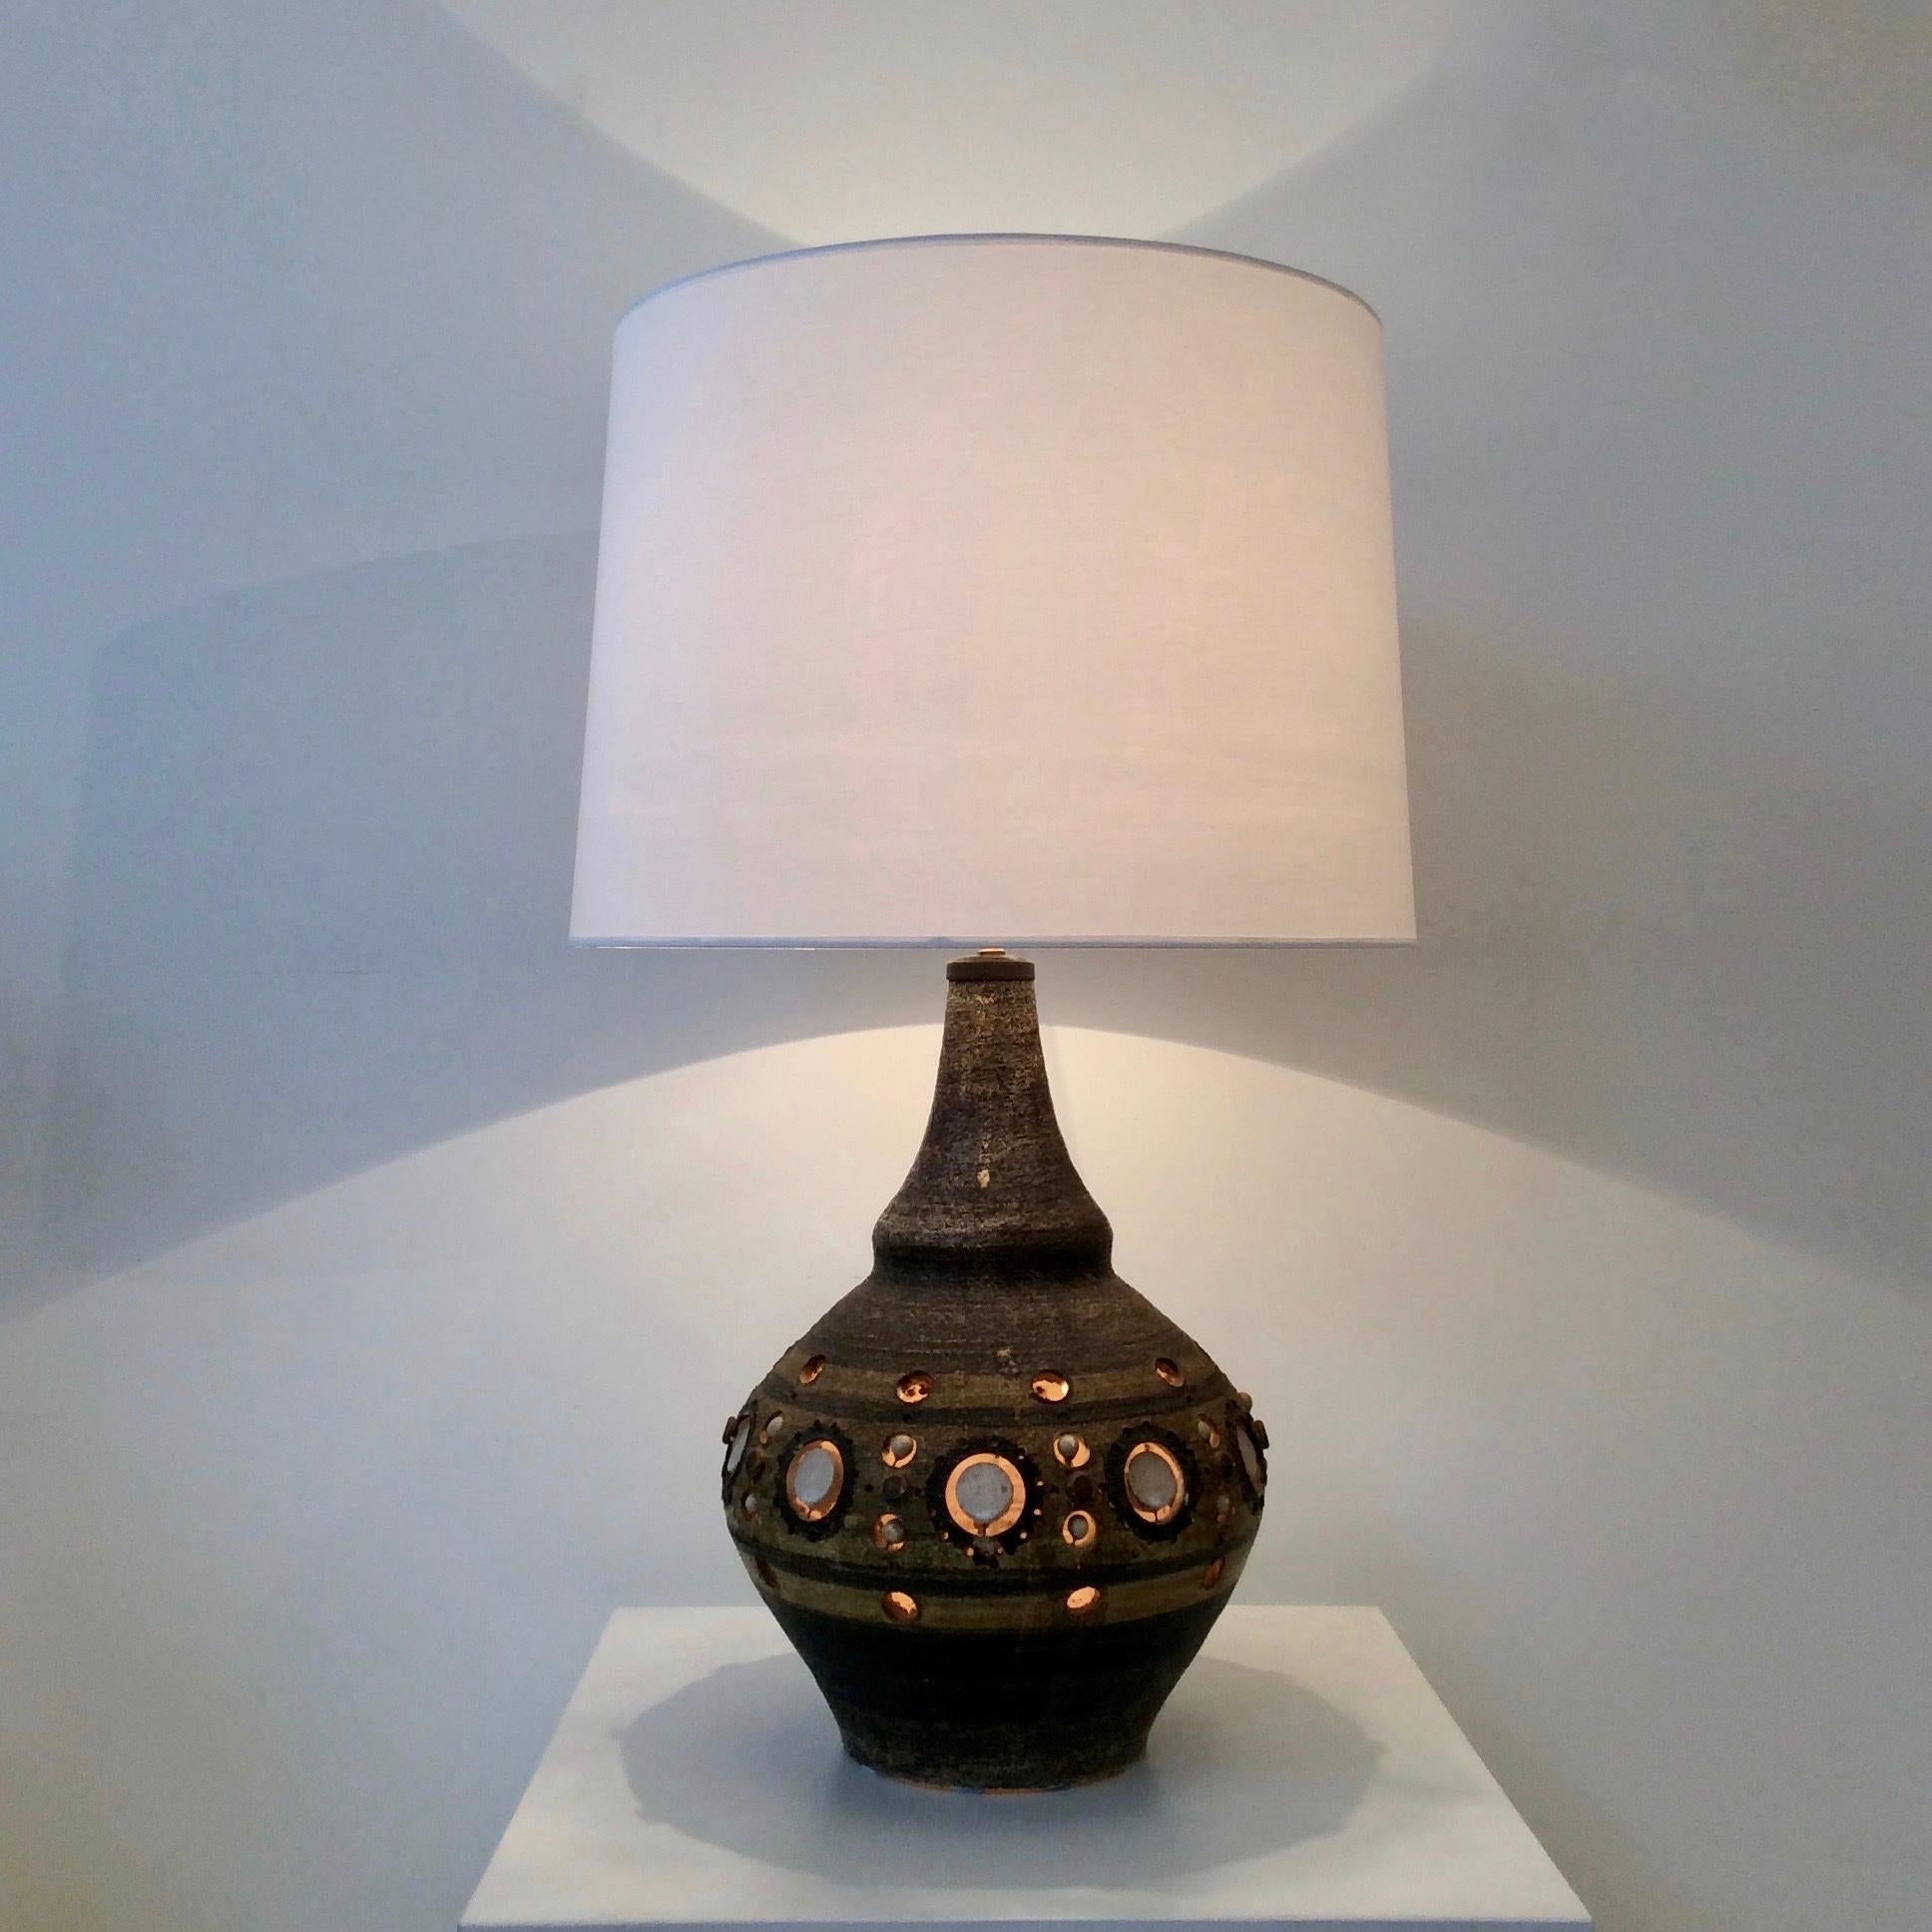 Nice Georges Pelletier large table lamp, circa 1970, France.
Brown incised and hand painted ceramic.
New white fabric shade.
Rewired.
One E 27 bulb of 60W and one E14 bulb of 15 W inside the ceramic.
Dimensions: 75 cm height, diameter 45